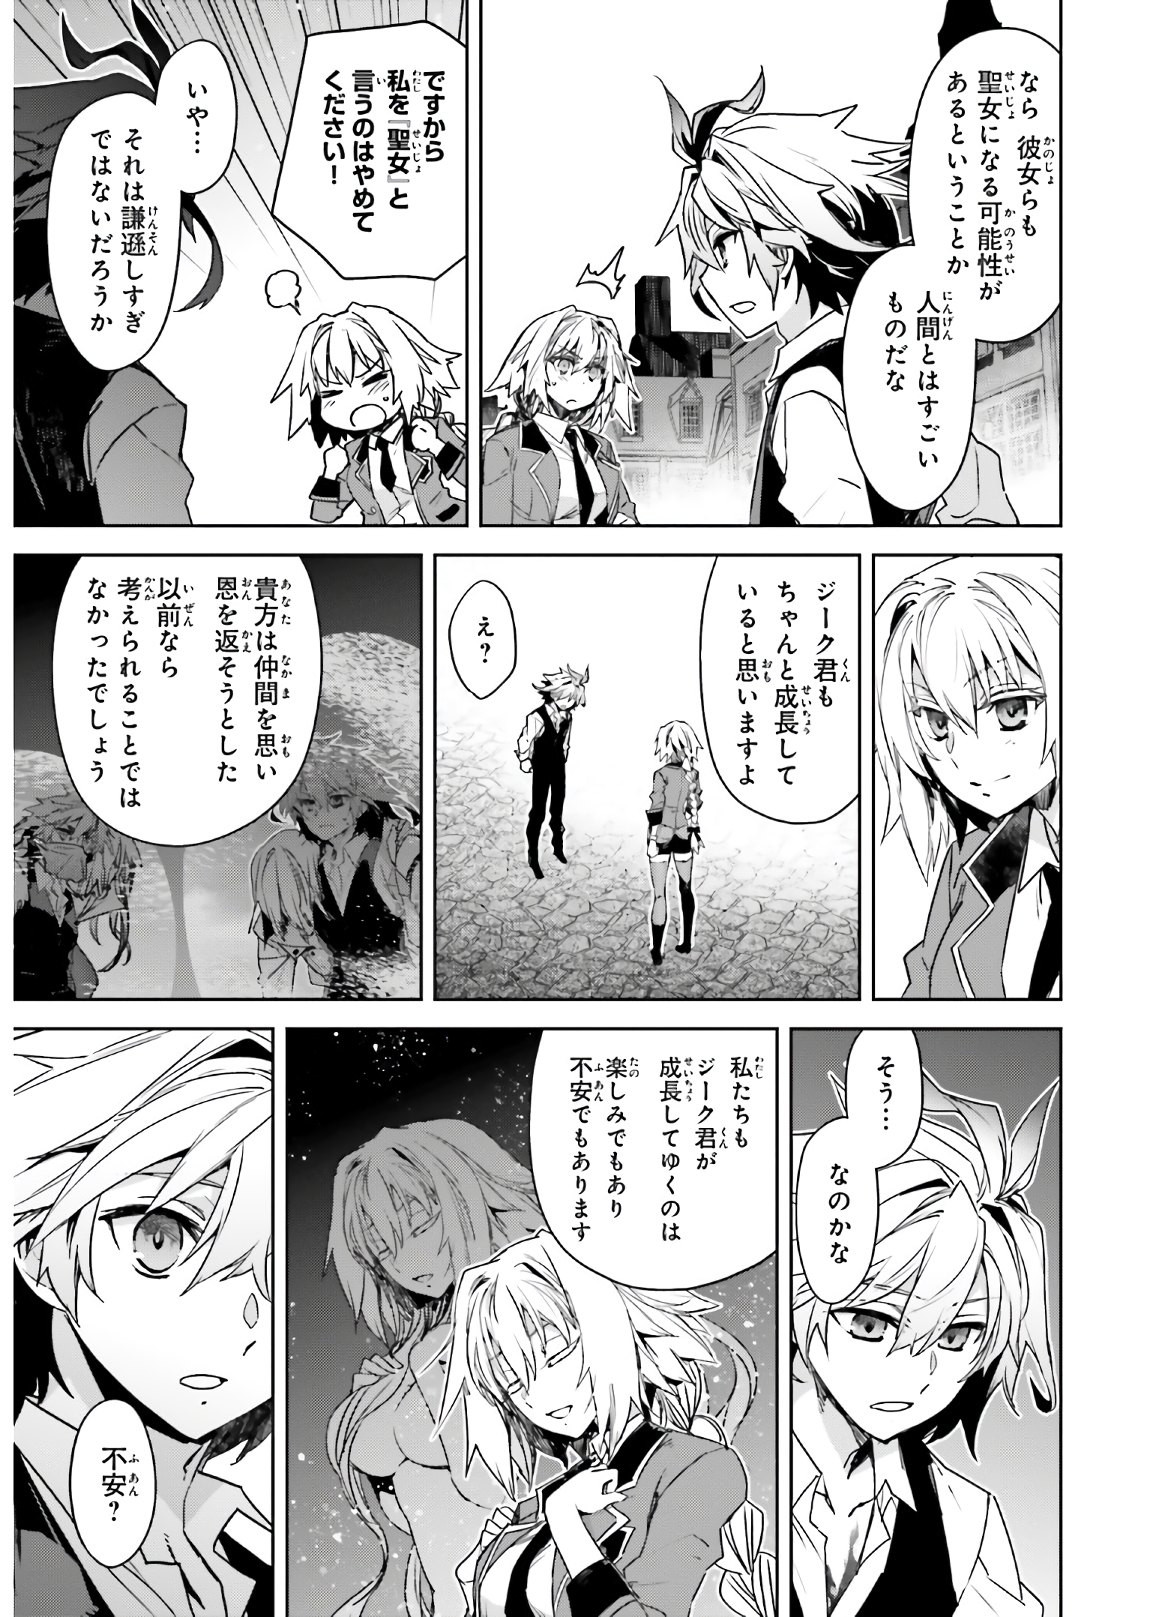 Fate-Apocrypha - Chapter 46 - Page 9